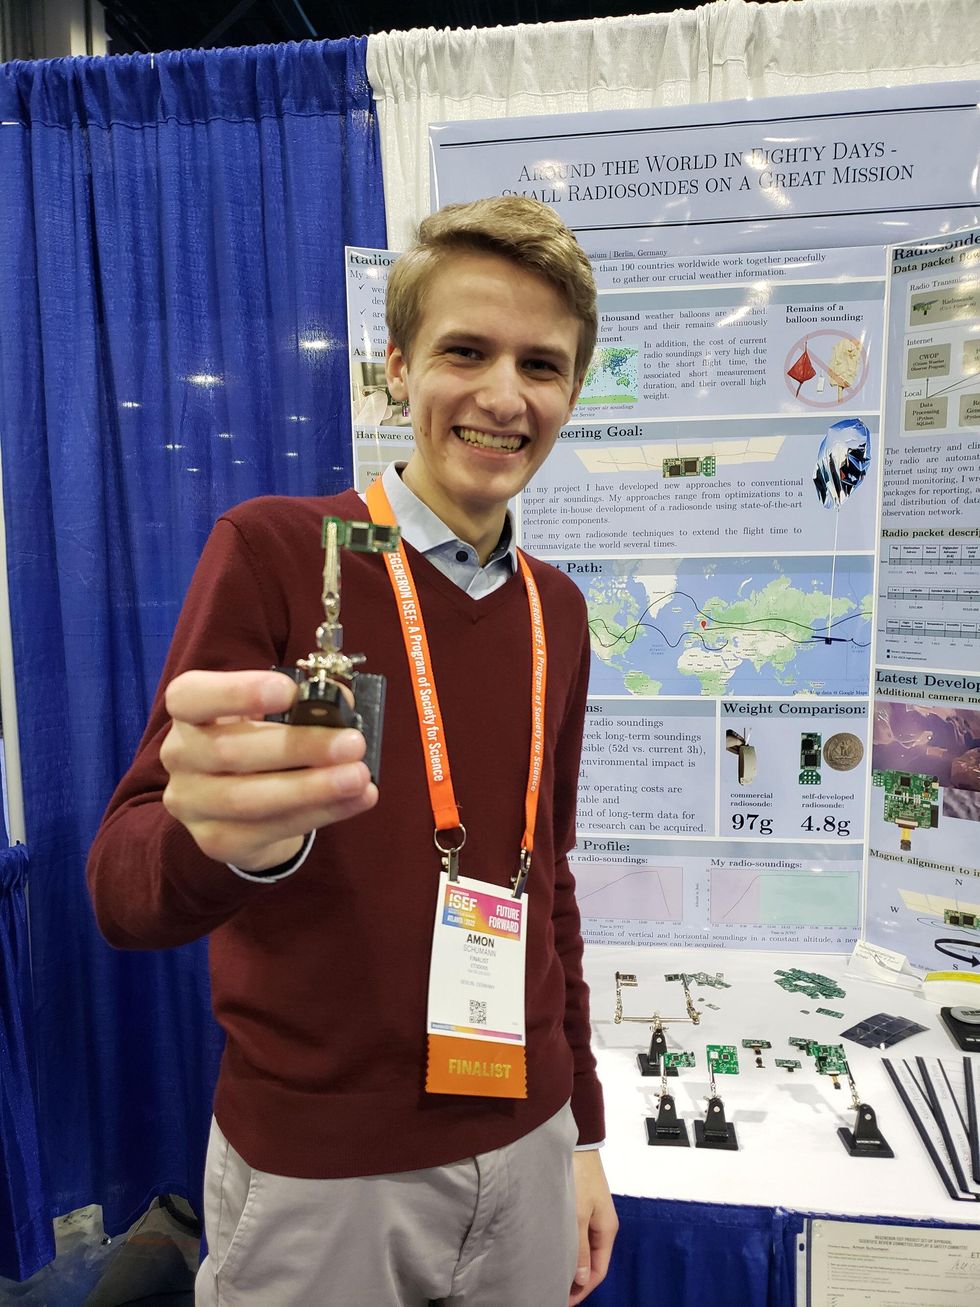 A young man holding a device called a radiosonde